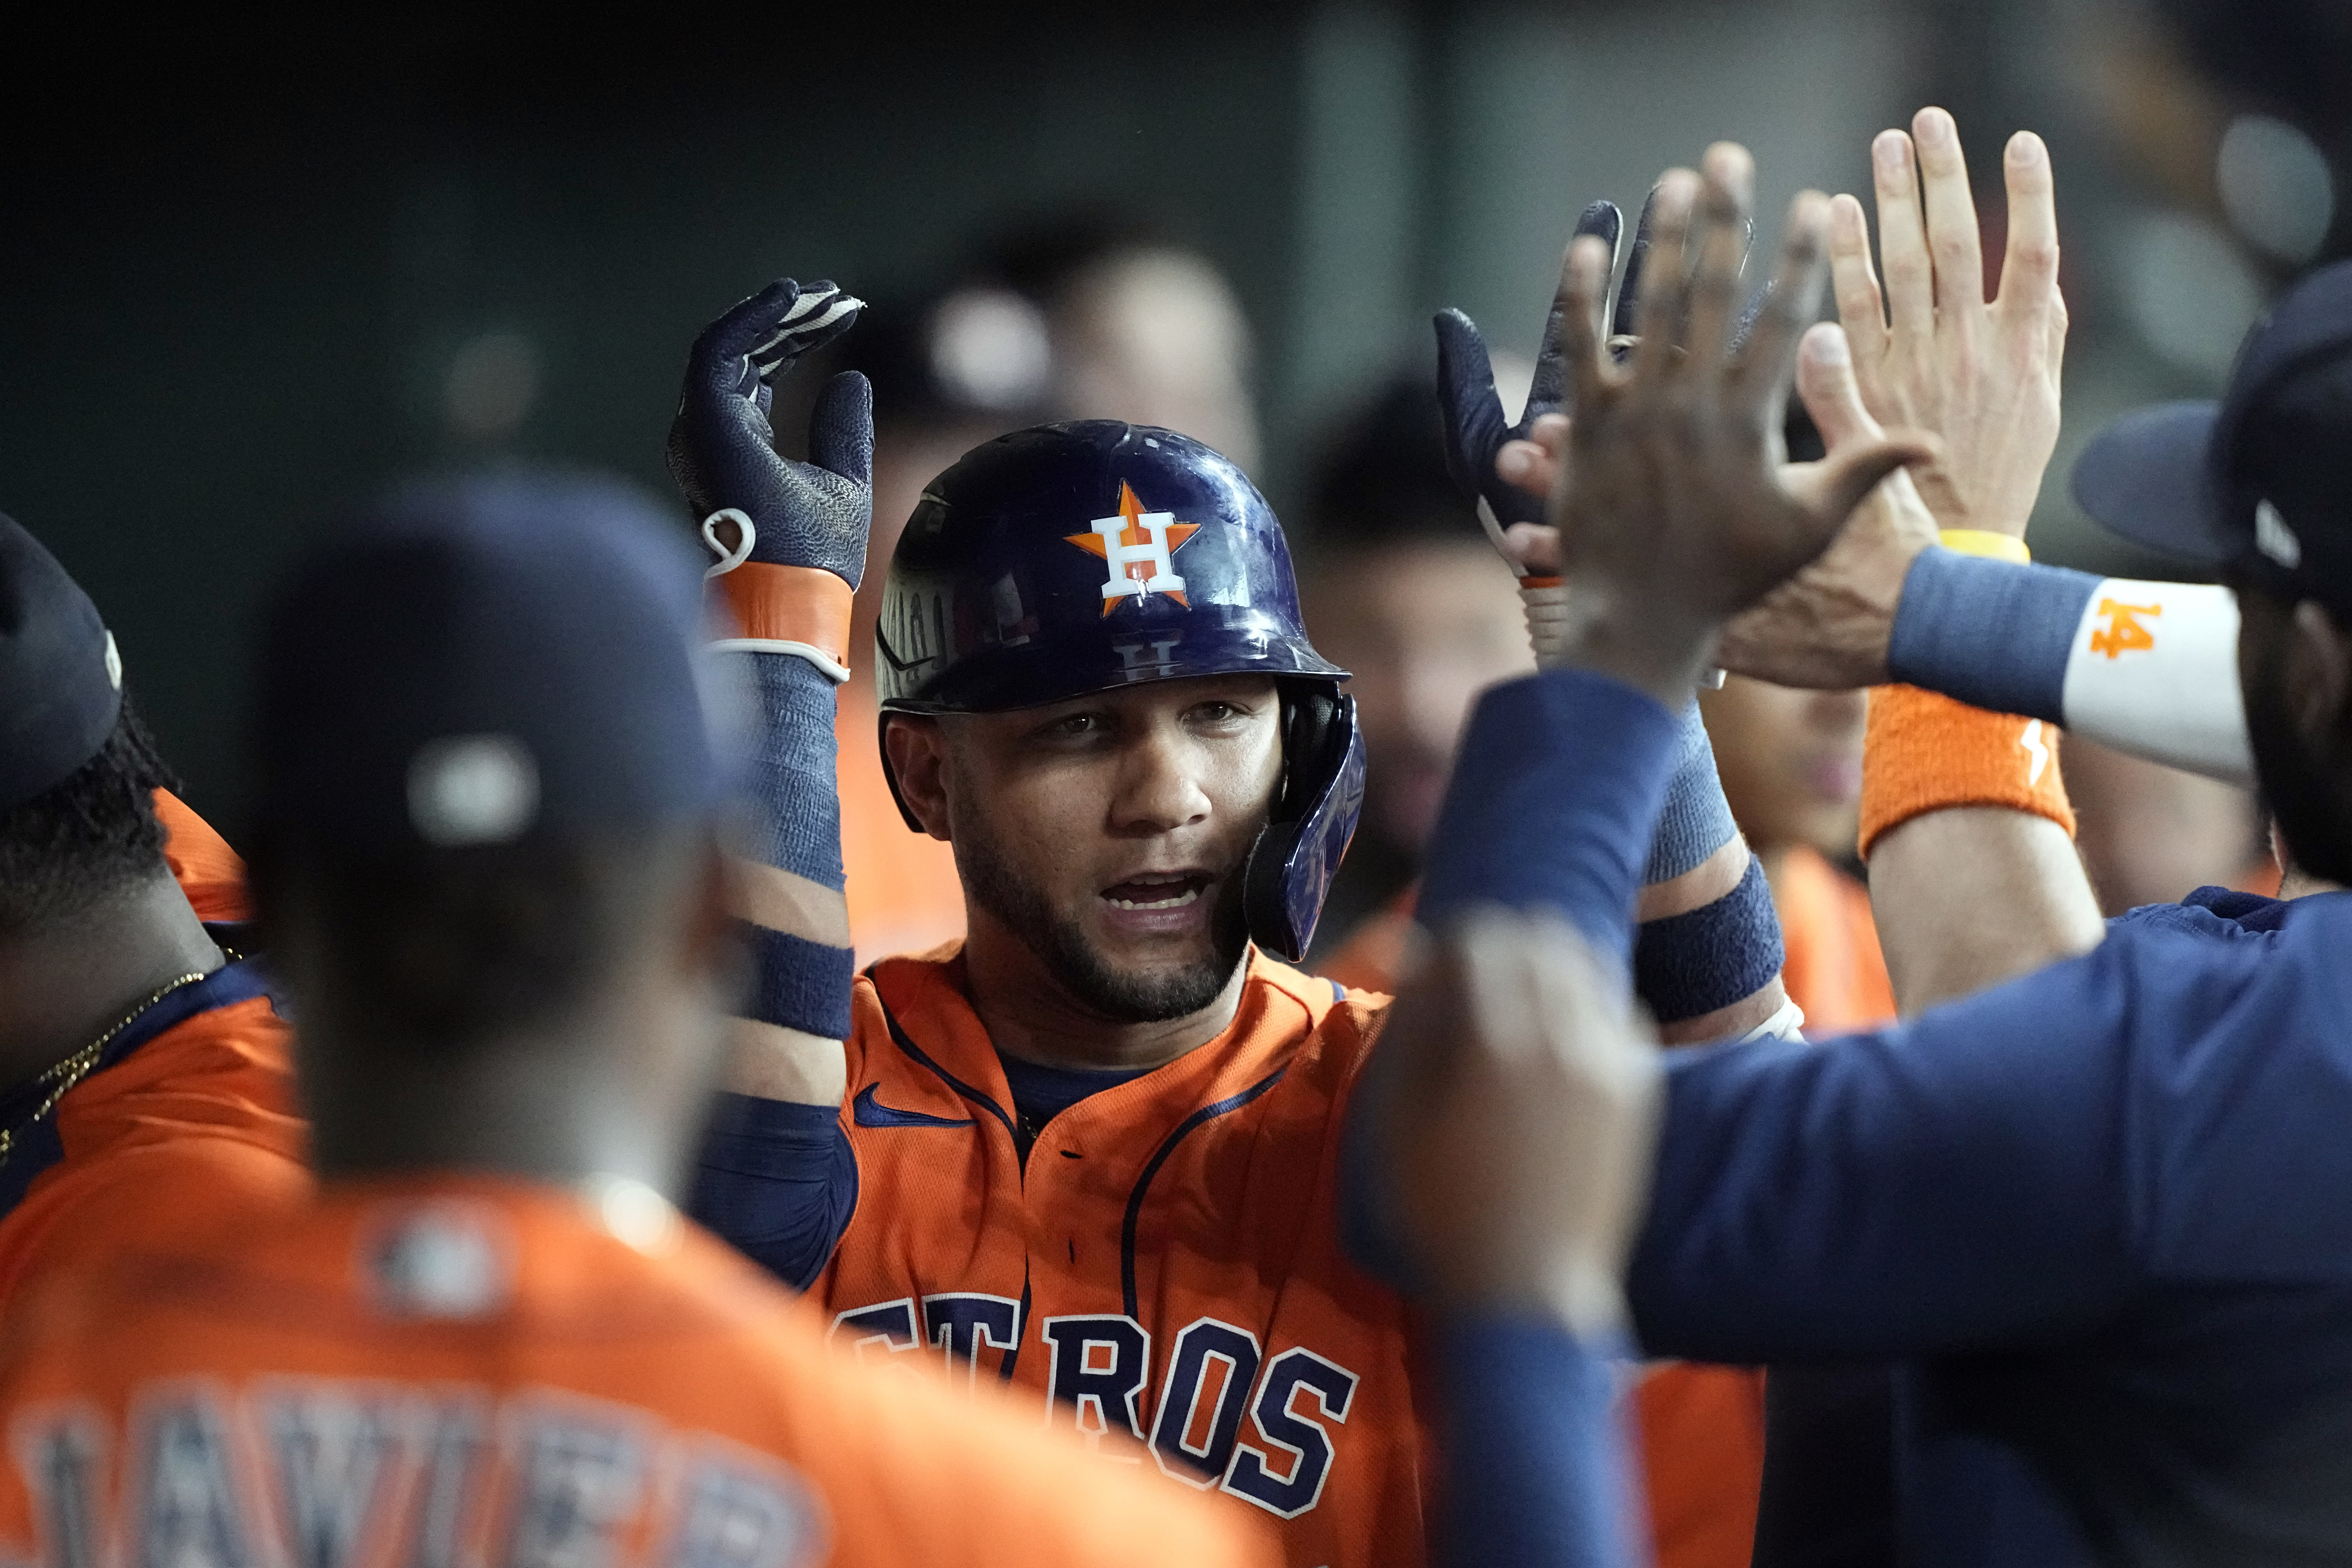 Houston Astros: Cristian Javier strikes out 11 in win over Angels